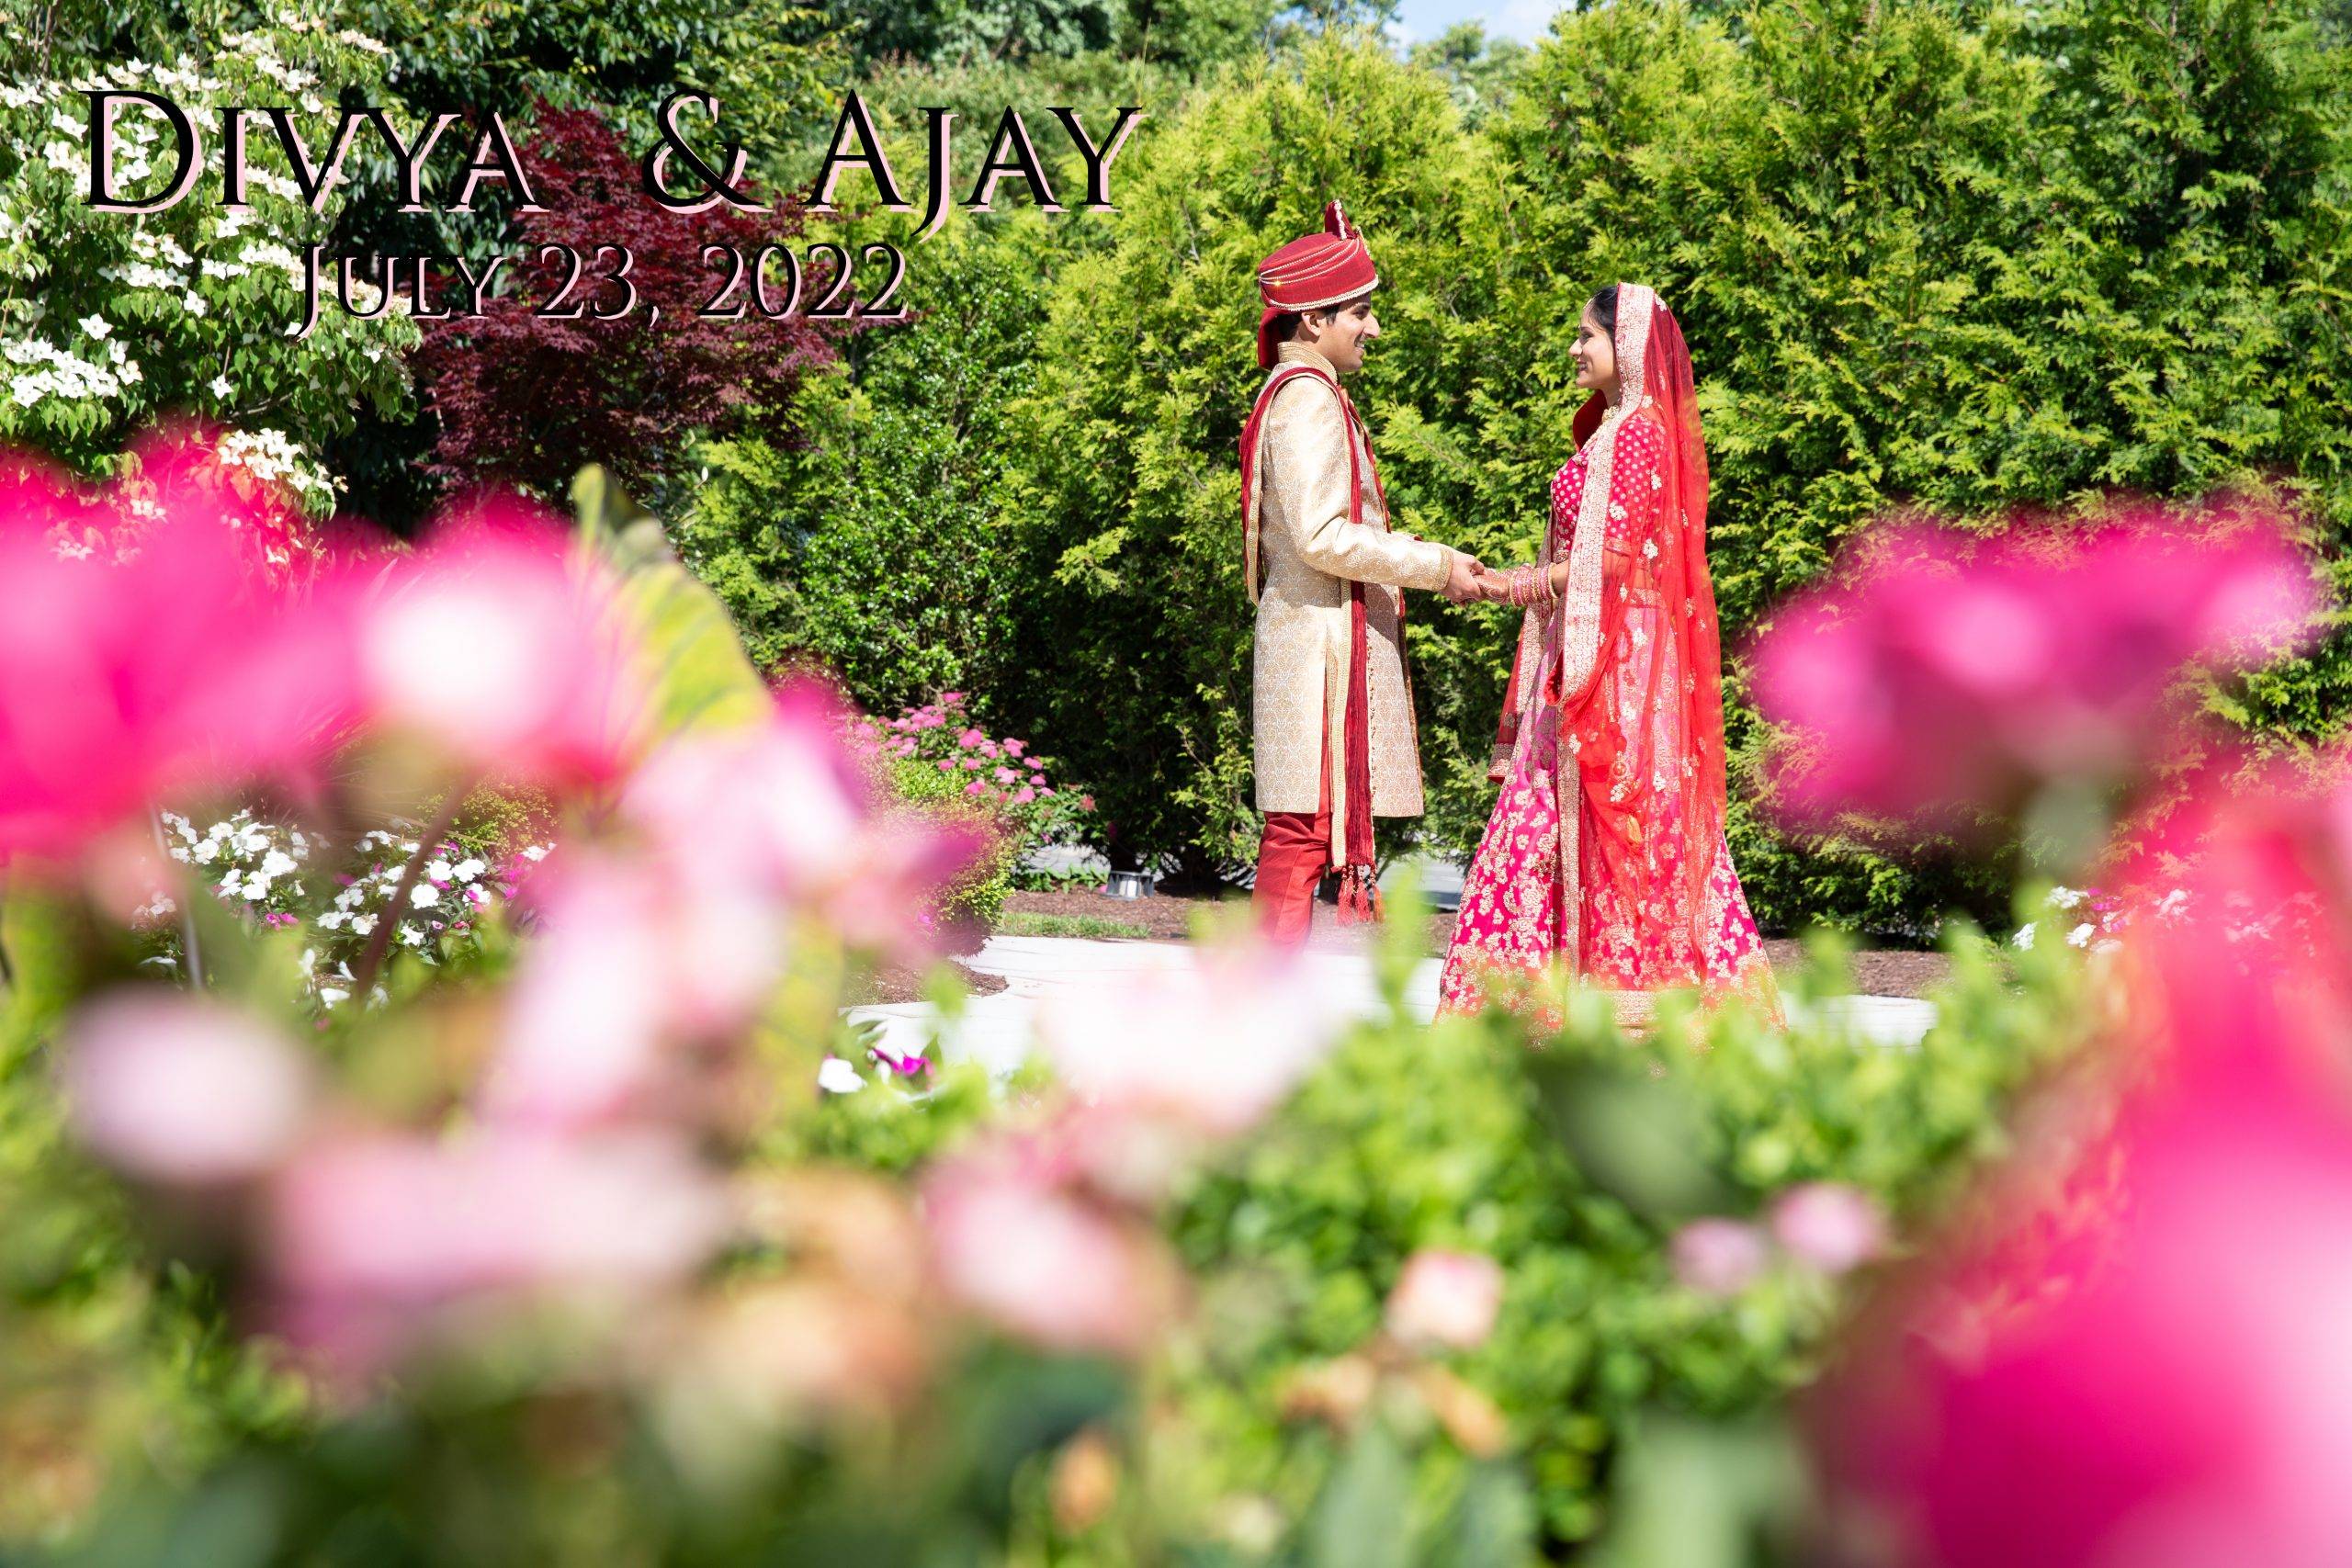 A bride and groom standing in a garden with pink flowers.